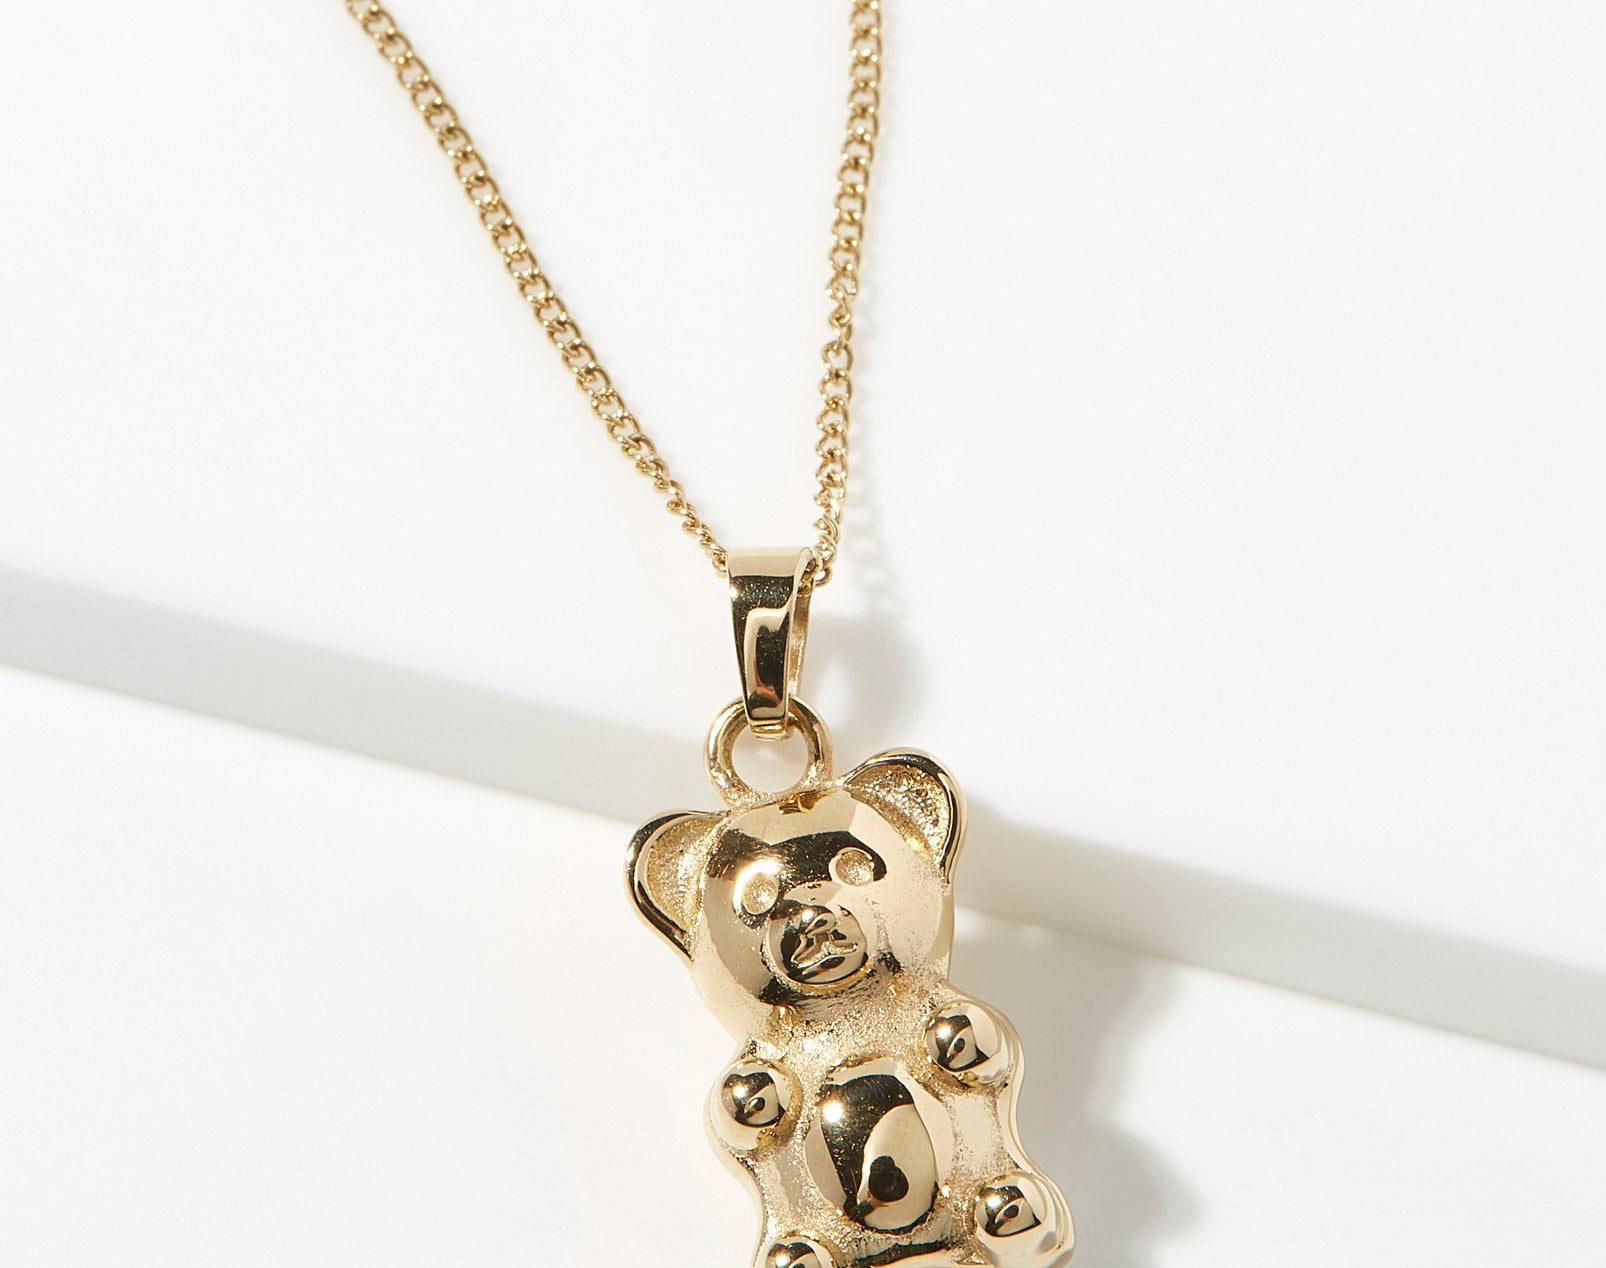 A gold necklace with a gummy bear shaped pendant